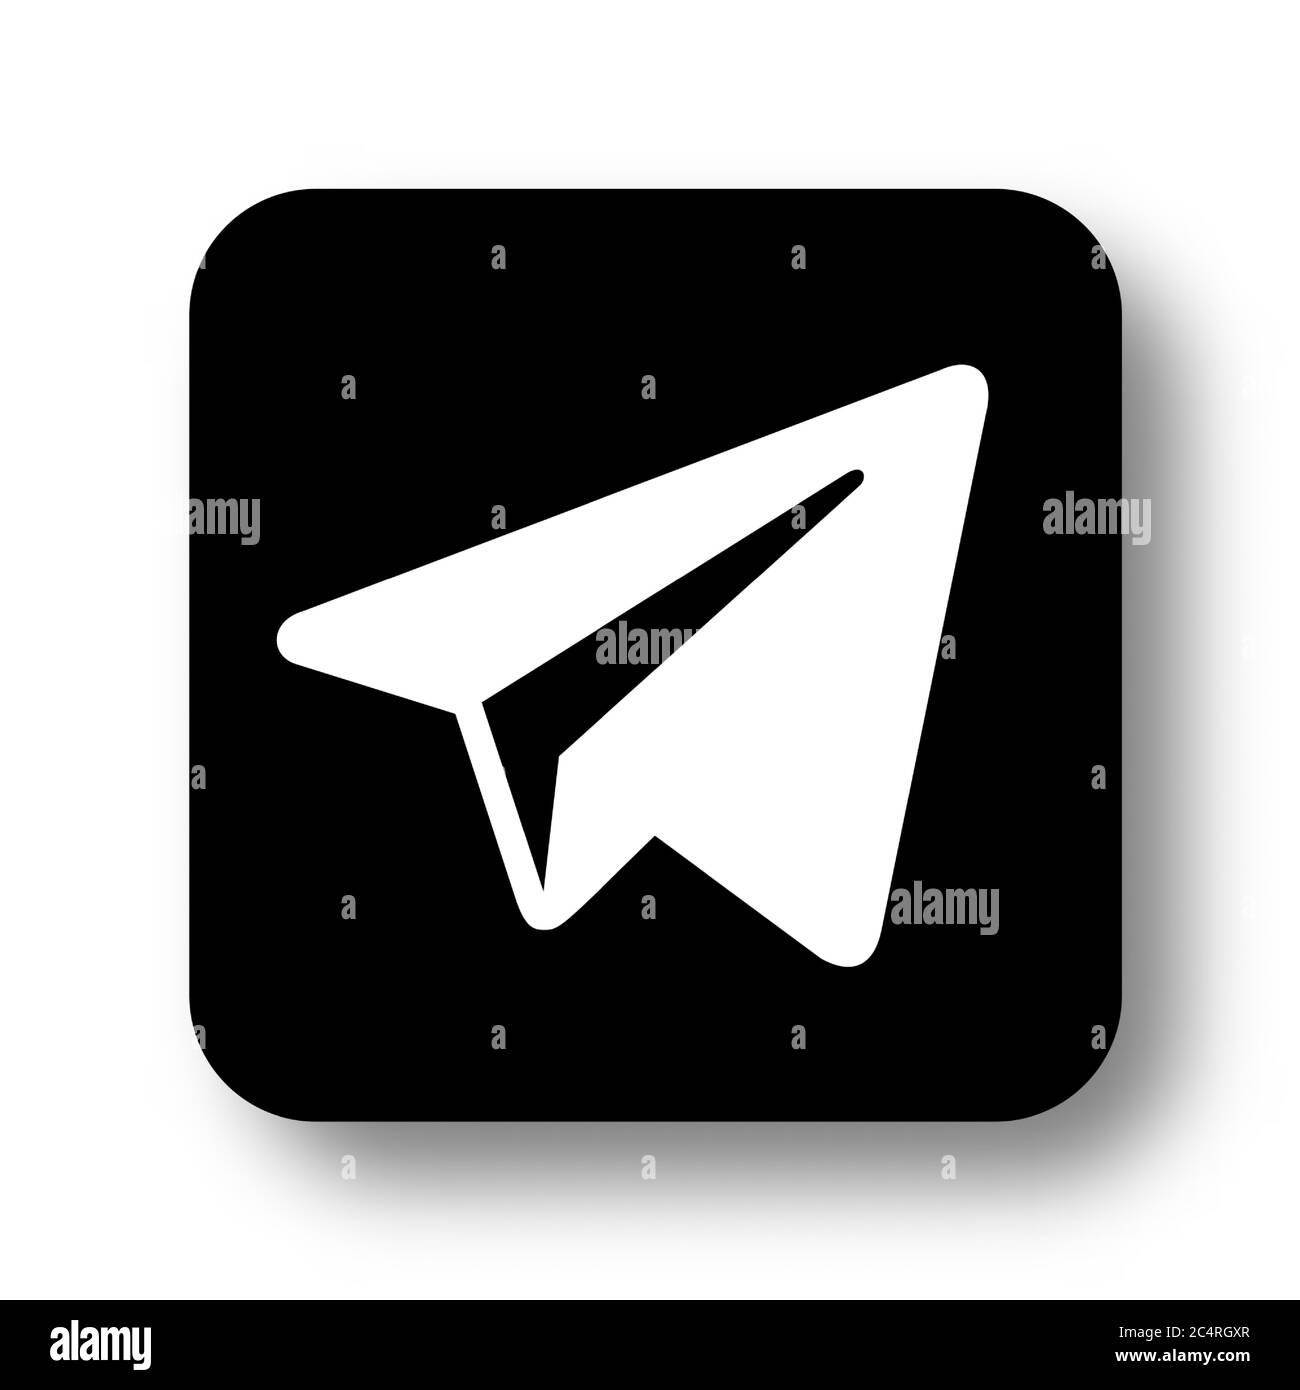 VORONEZH, RUSSIA - JANUARY 31, 2020: Telegram logo black square icon with soft shadow Stock Vector